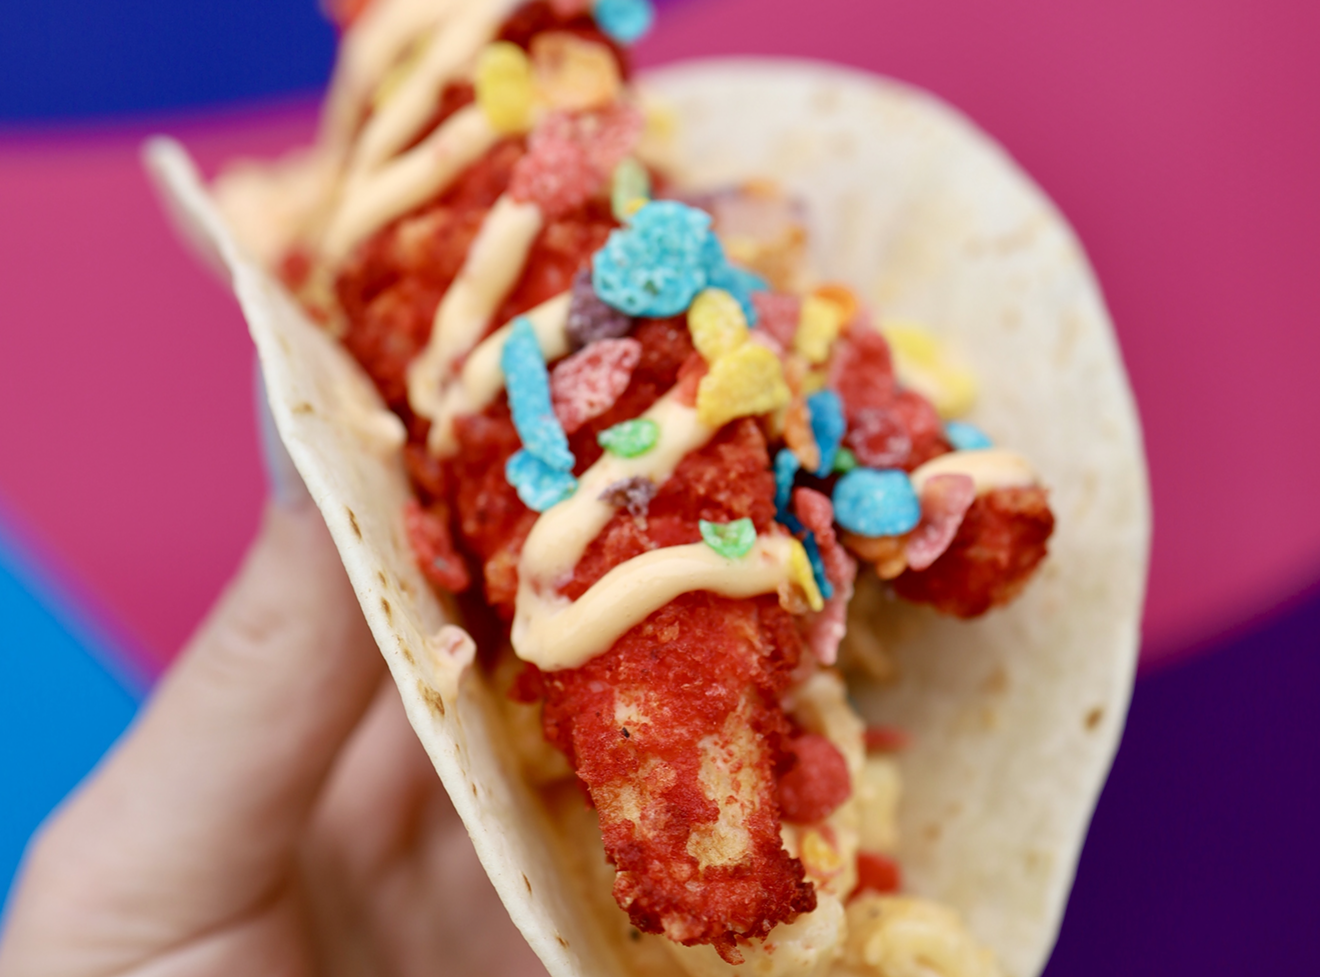 The "4/20 Blazin' Taco" from Velvet Taco is made of mac & cheese, Flamin' Hot Cheetos-covered chicken tenders, and red chili aioli sprinkled with Fruity Pebbles cereal.